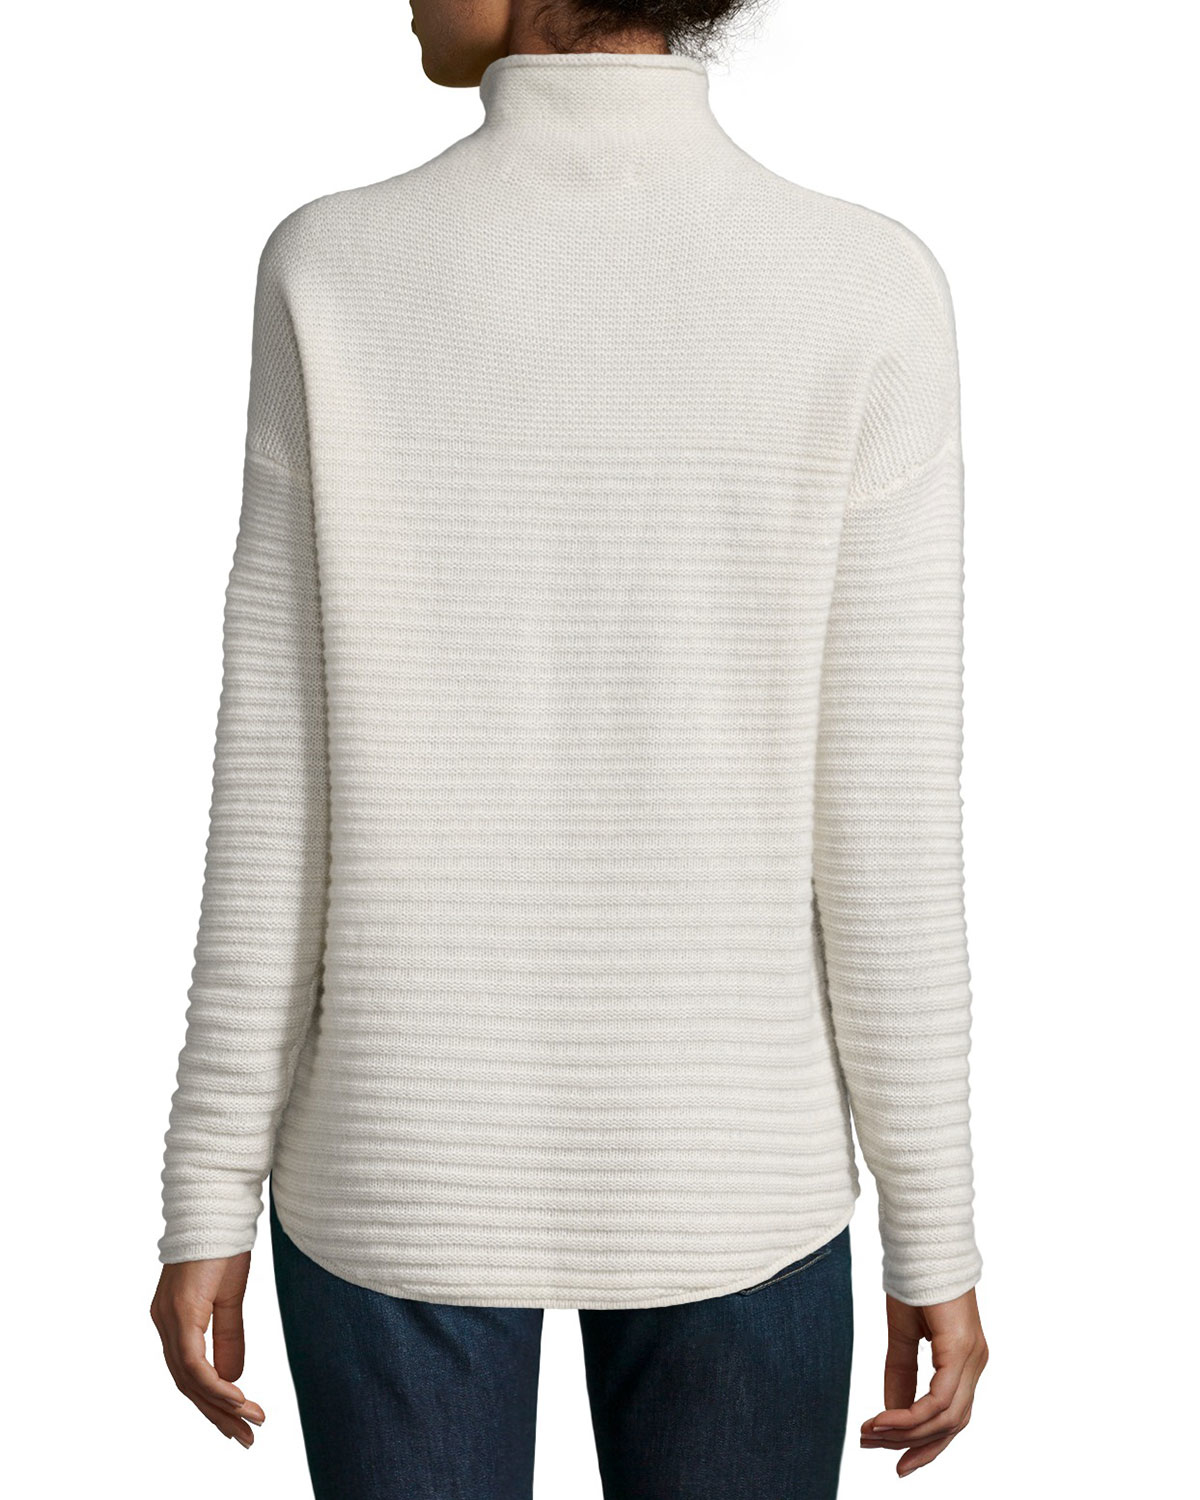 360cashmere Ribbed Cashmere Mock Turtleneck Sweater in White | Lyst